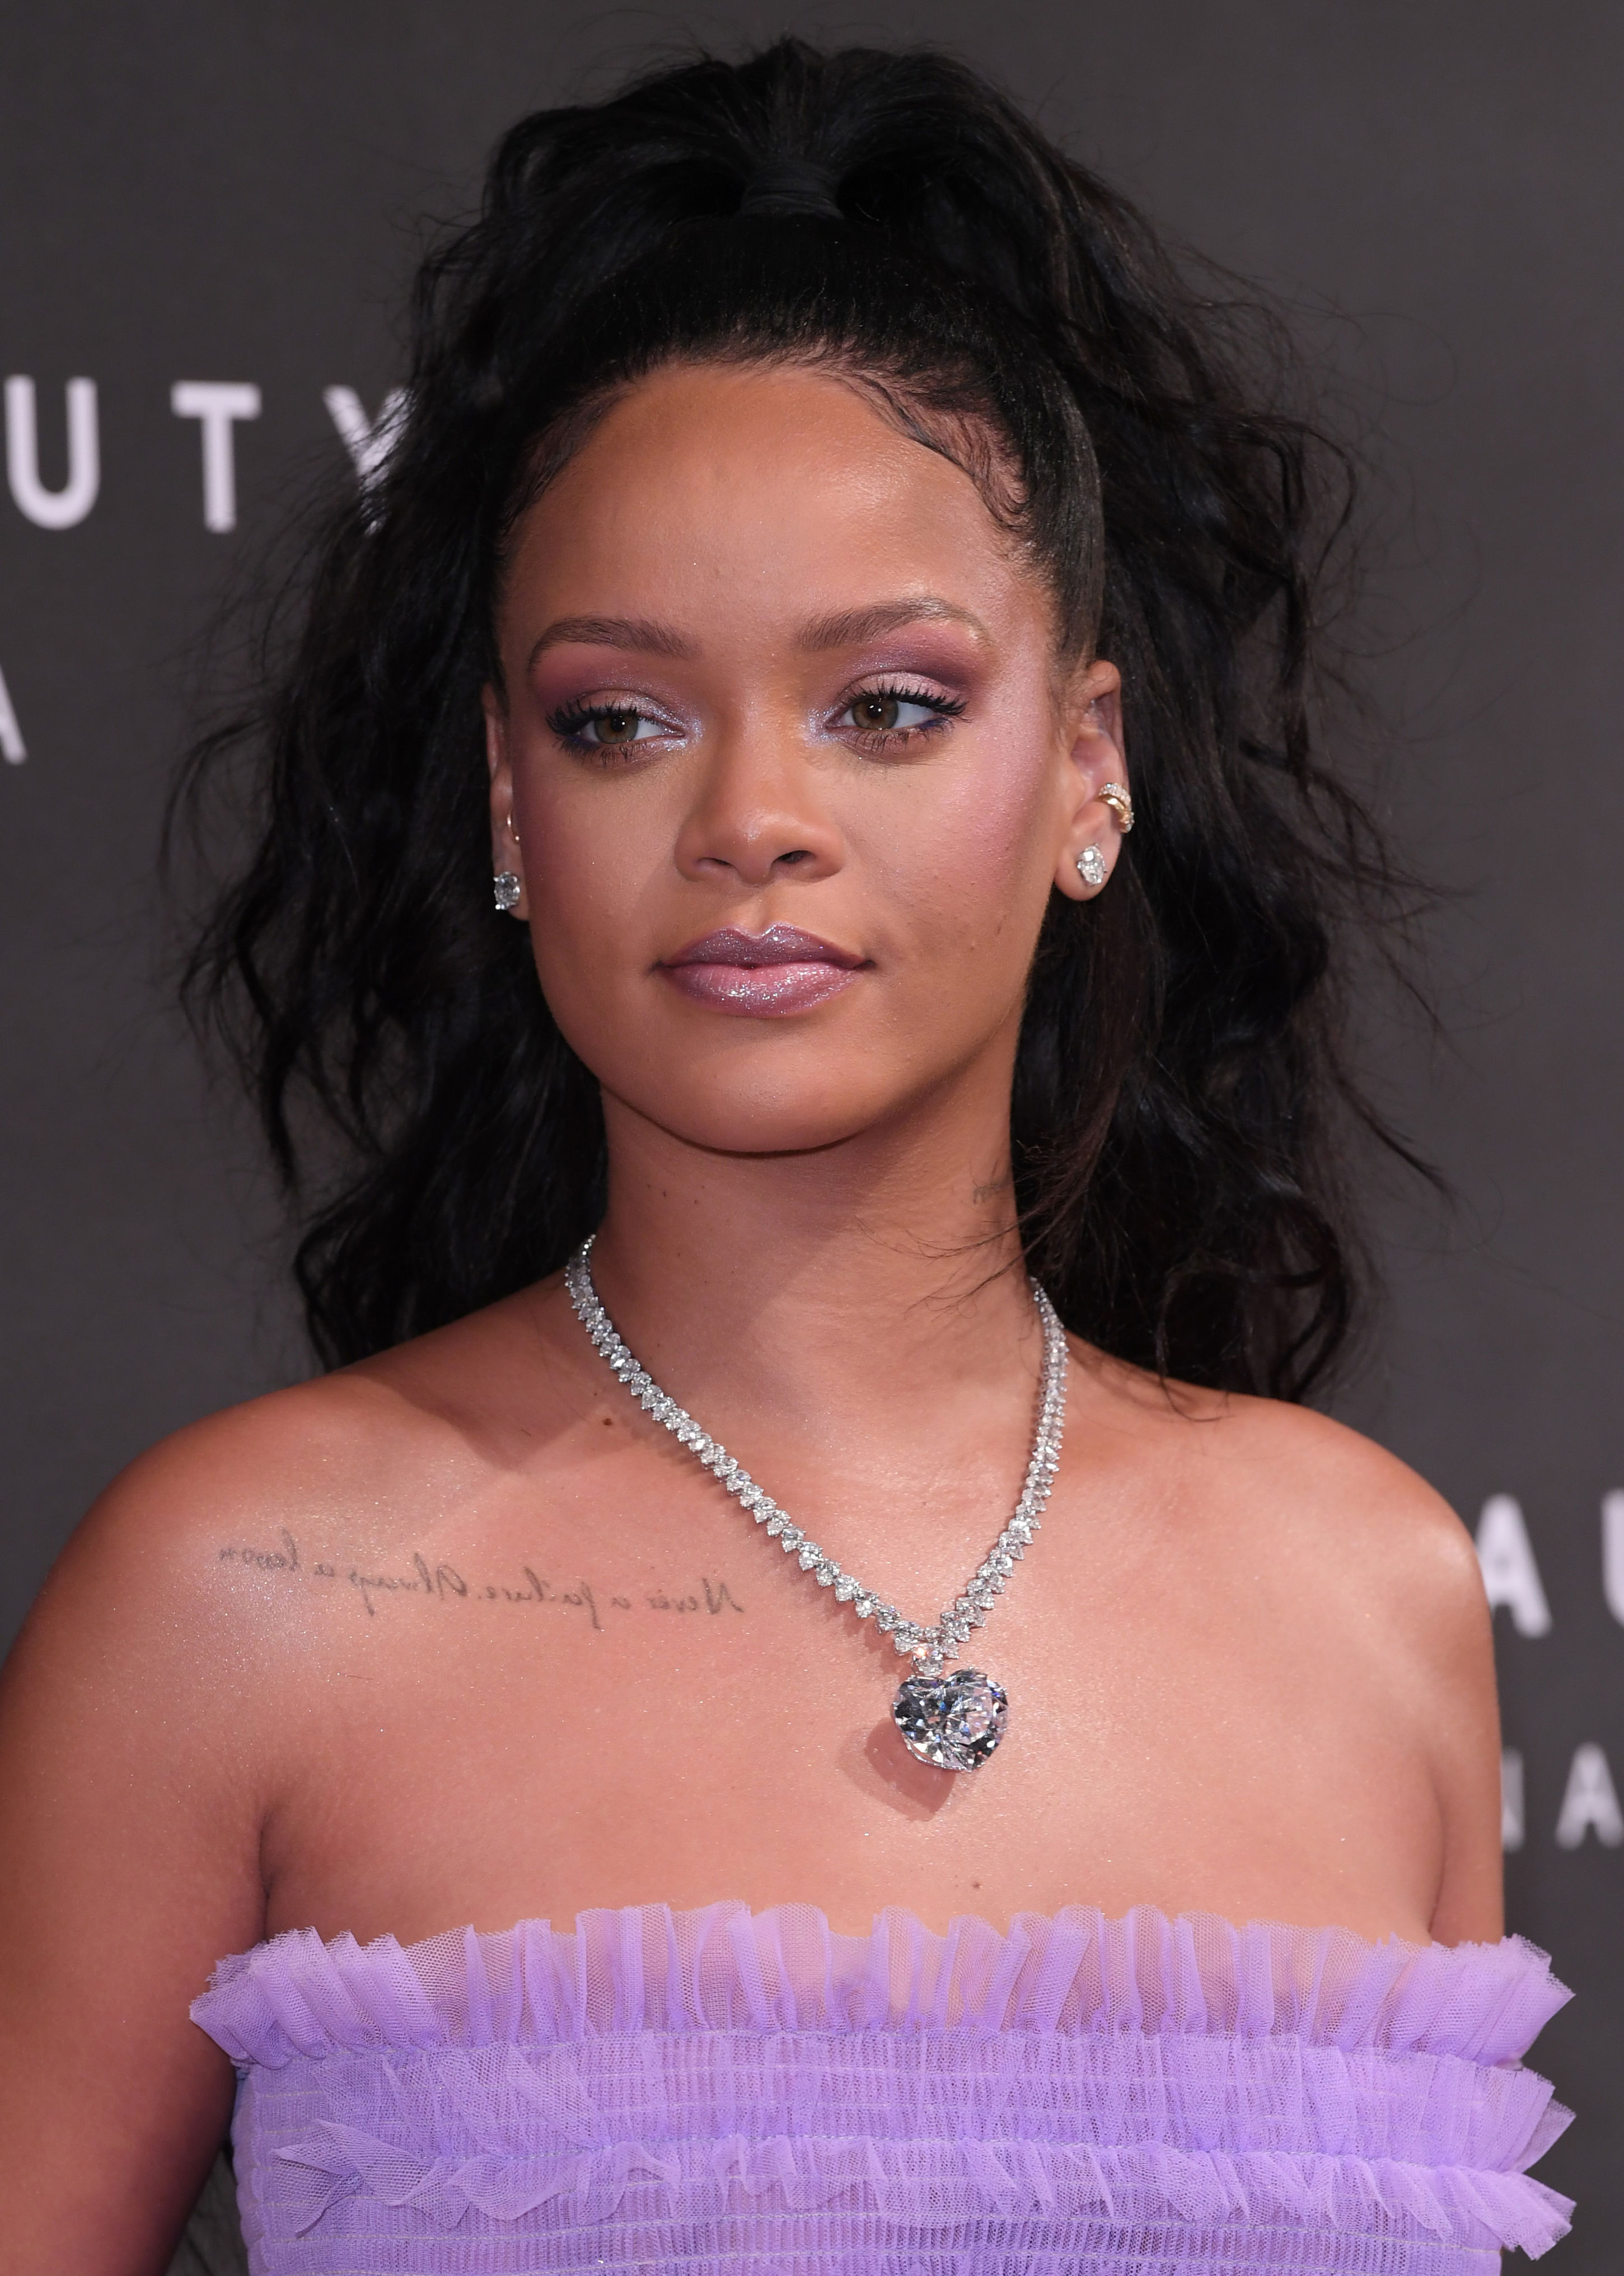 <p>In 2015, <a href="https://www.wonderwall.com/celebrity/profiles/overview/rihanna-384.article">Rihanna</a> became the first Black face of Dior. "It feels fantastic," she told MTV of the milestone. "It is such a big deal for me, for my culture, for a lot of young girls of any color."</p>